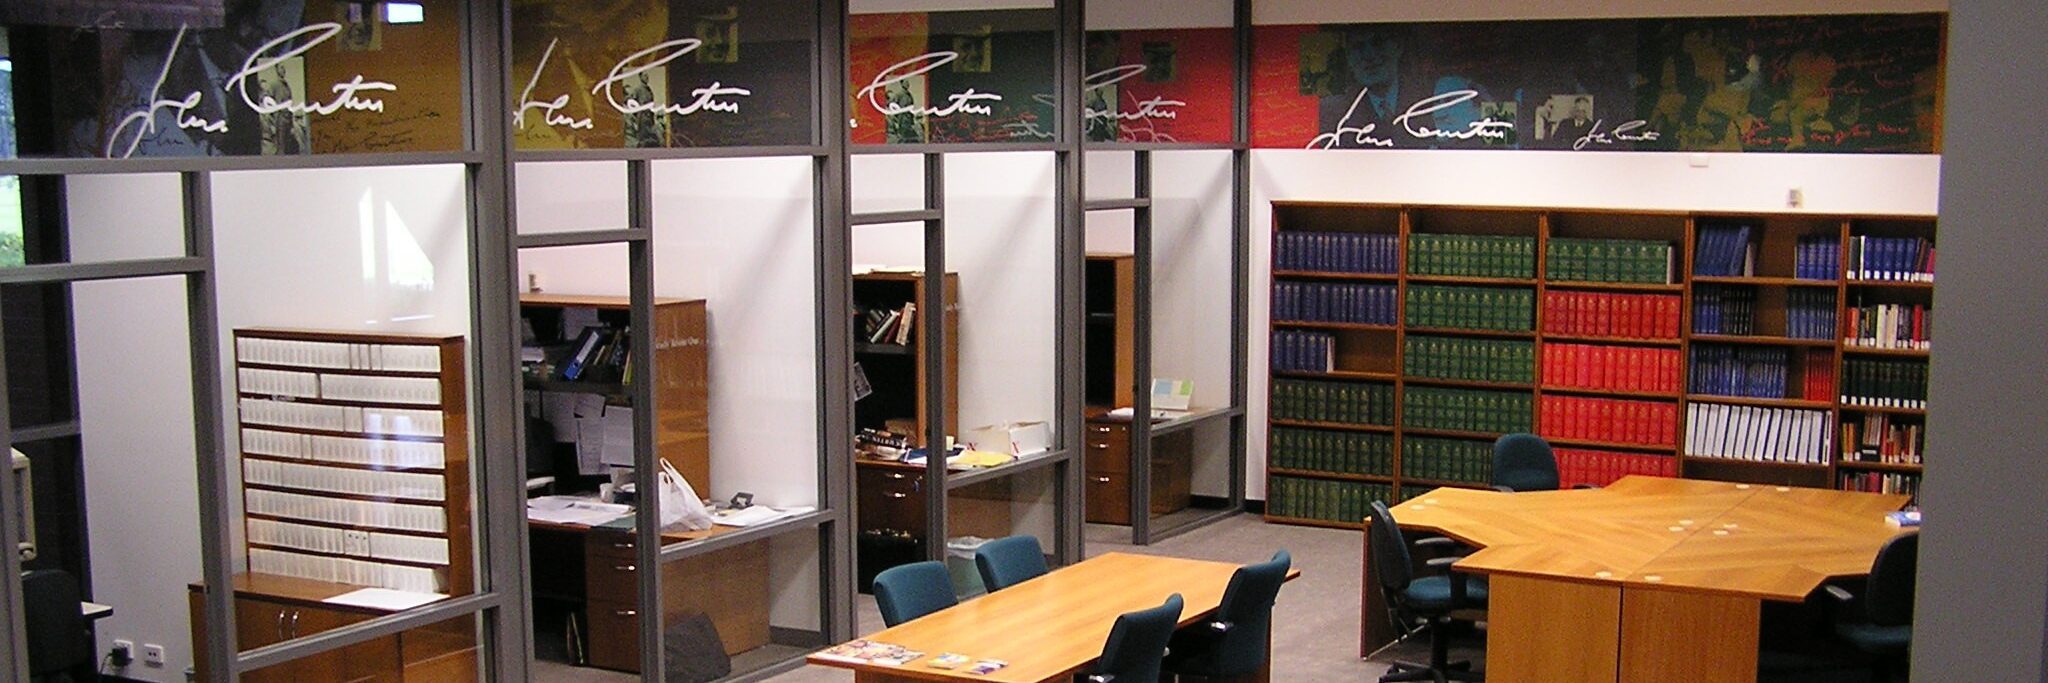 Aerial shot of desks, bookshelves and computers available in the JCMPL reading room